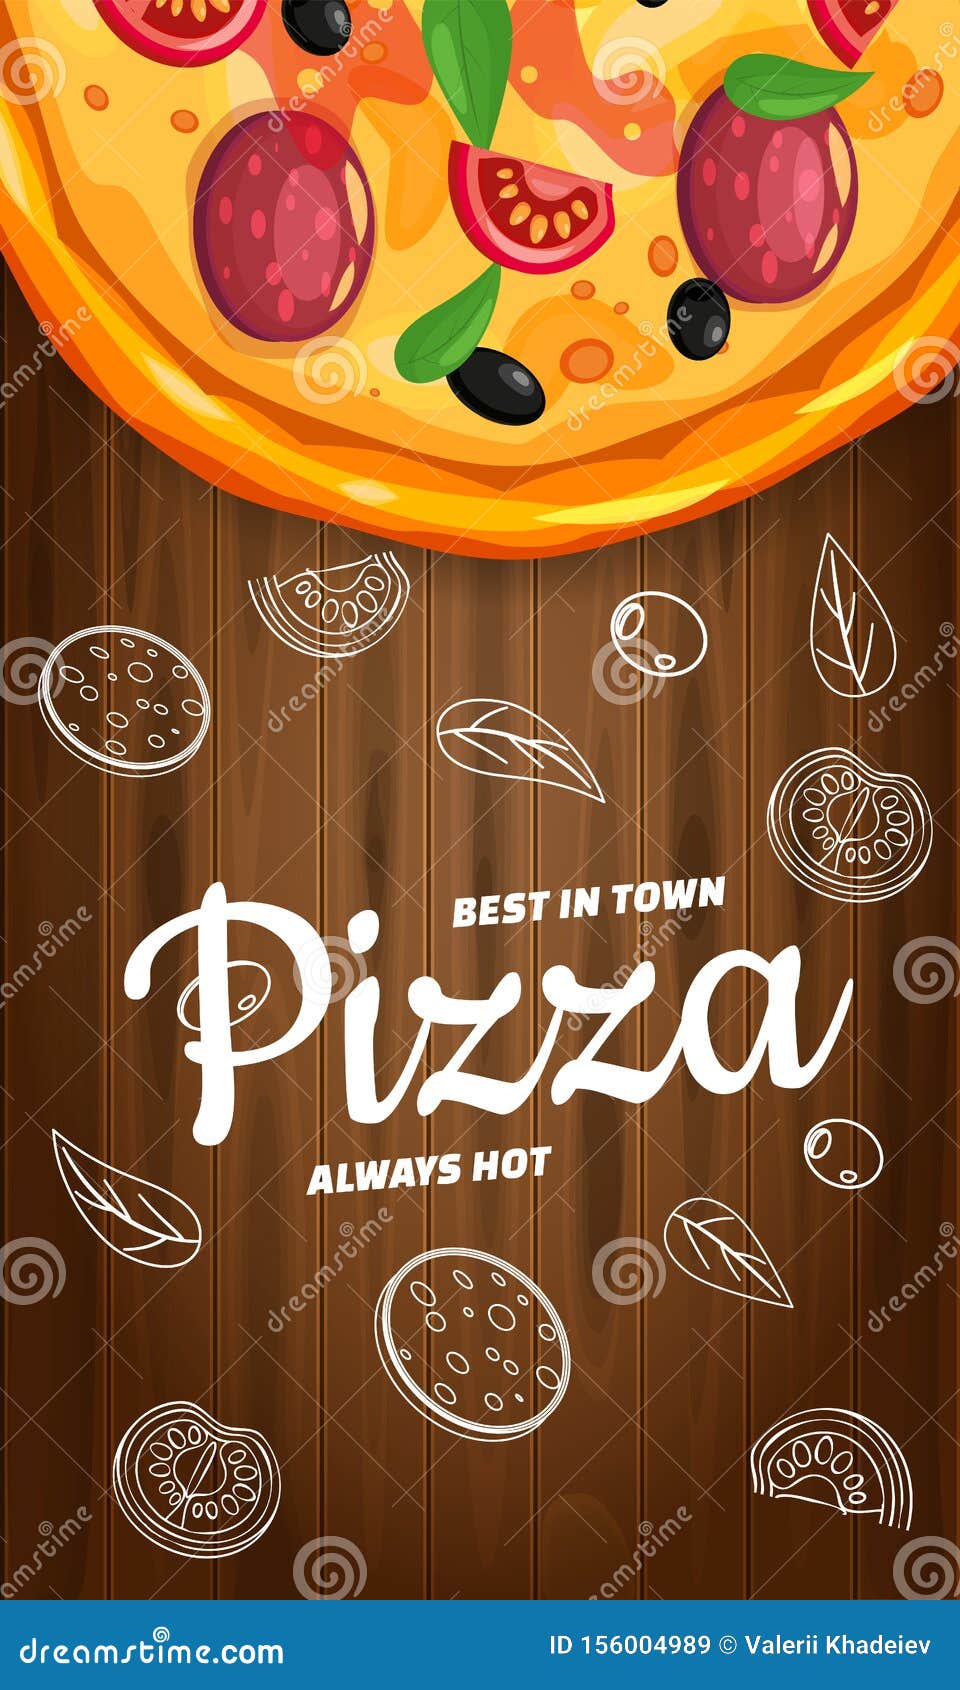 Pizza Pizzeria Italian Template Vertical Flyer Baner With Ingredients And Text On Wooden Background Fast Food Top View Stock Vector Illustration Of Design Banner